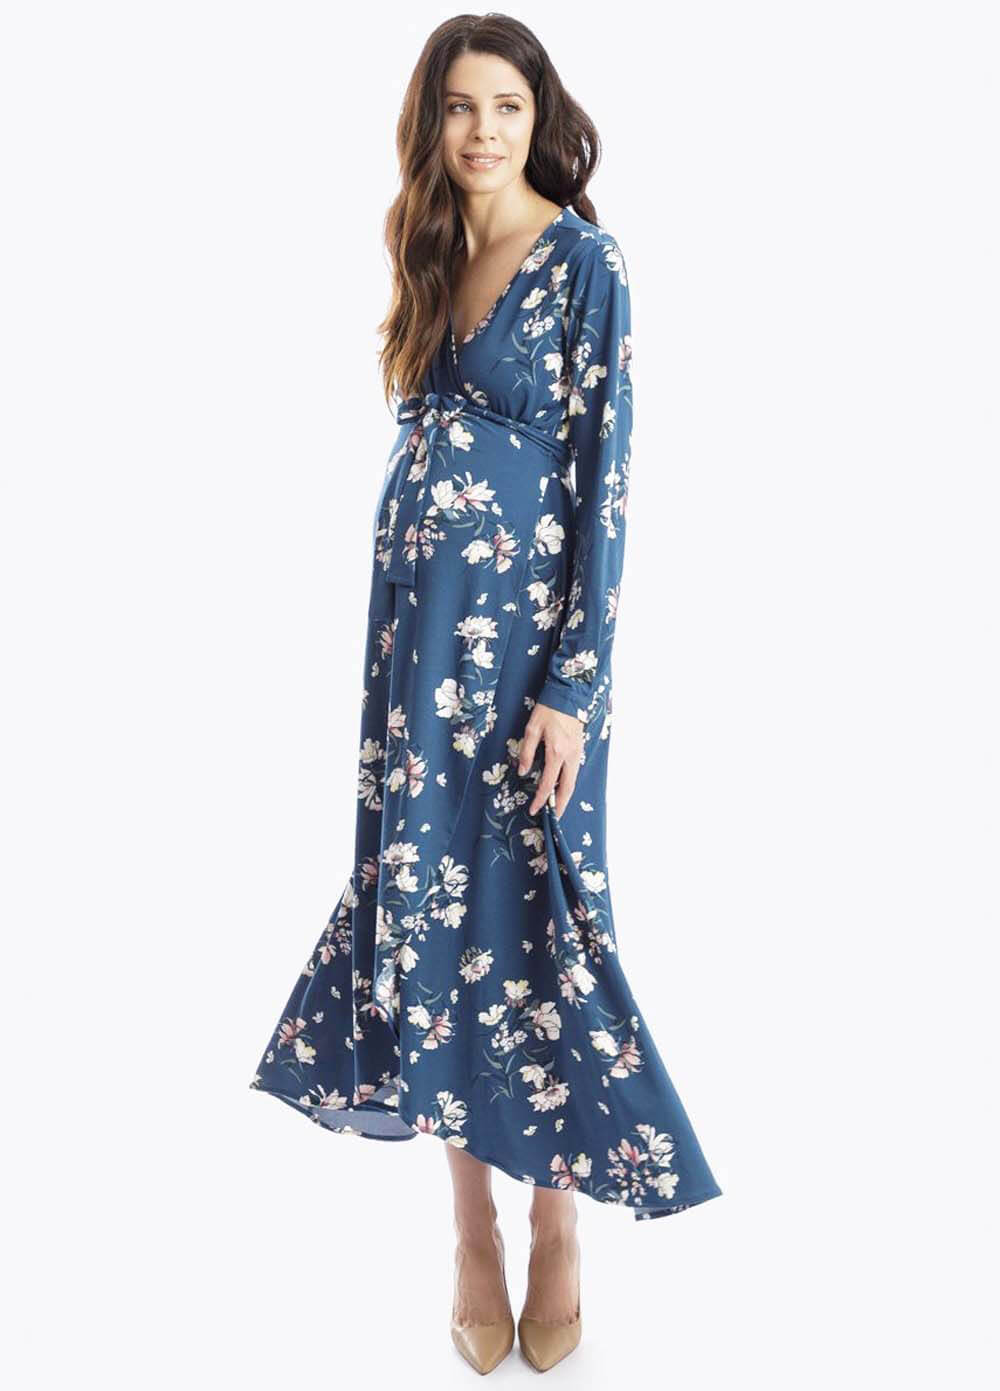 Wrap Dress in Teal Floral by Maive ☀ Bo